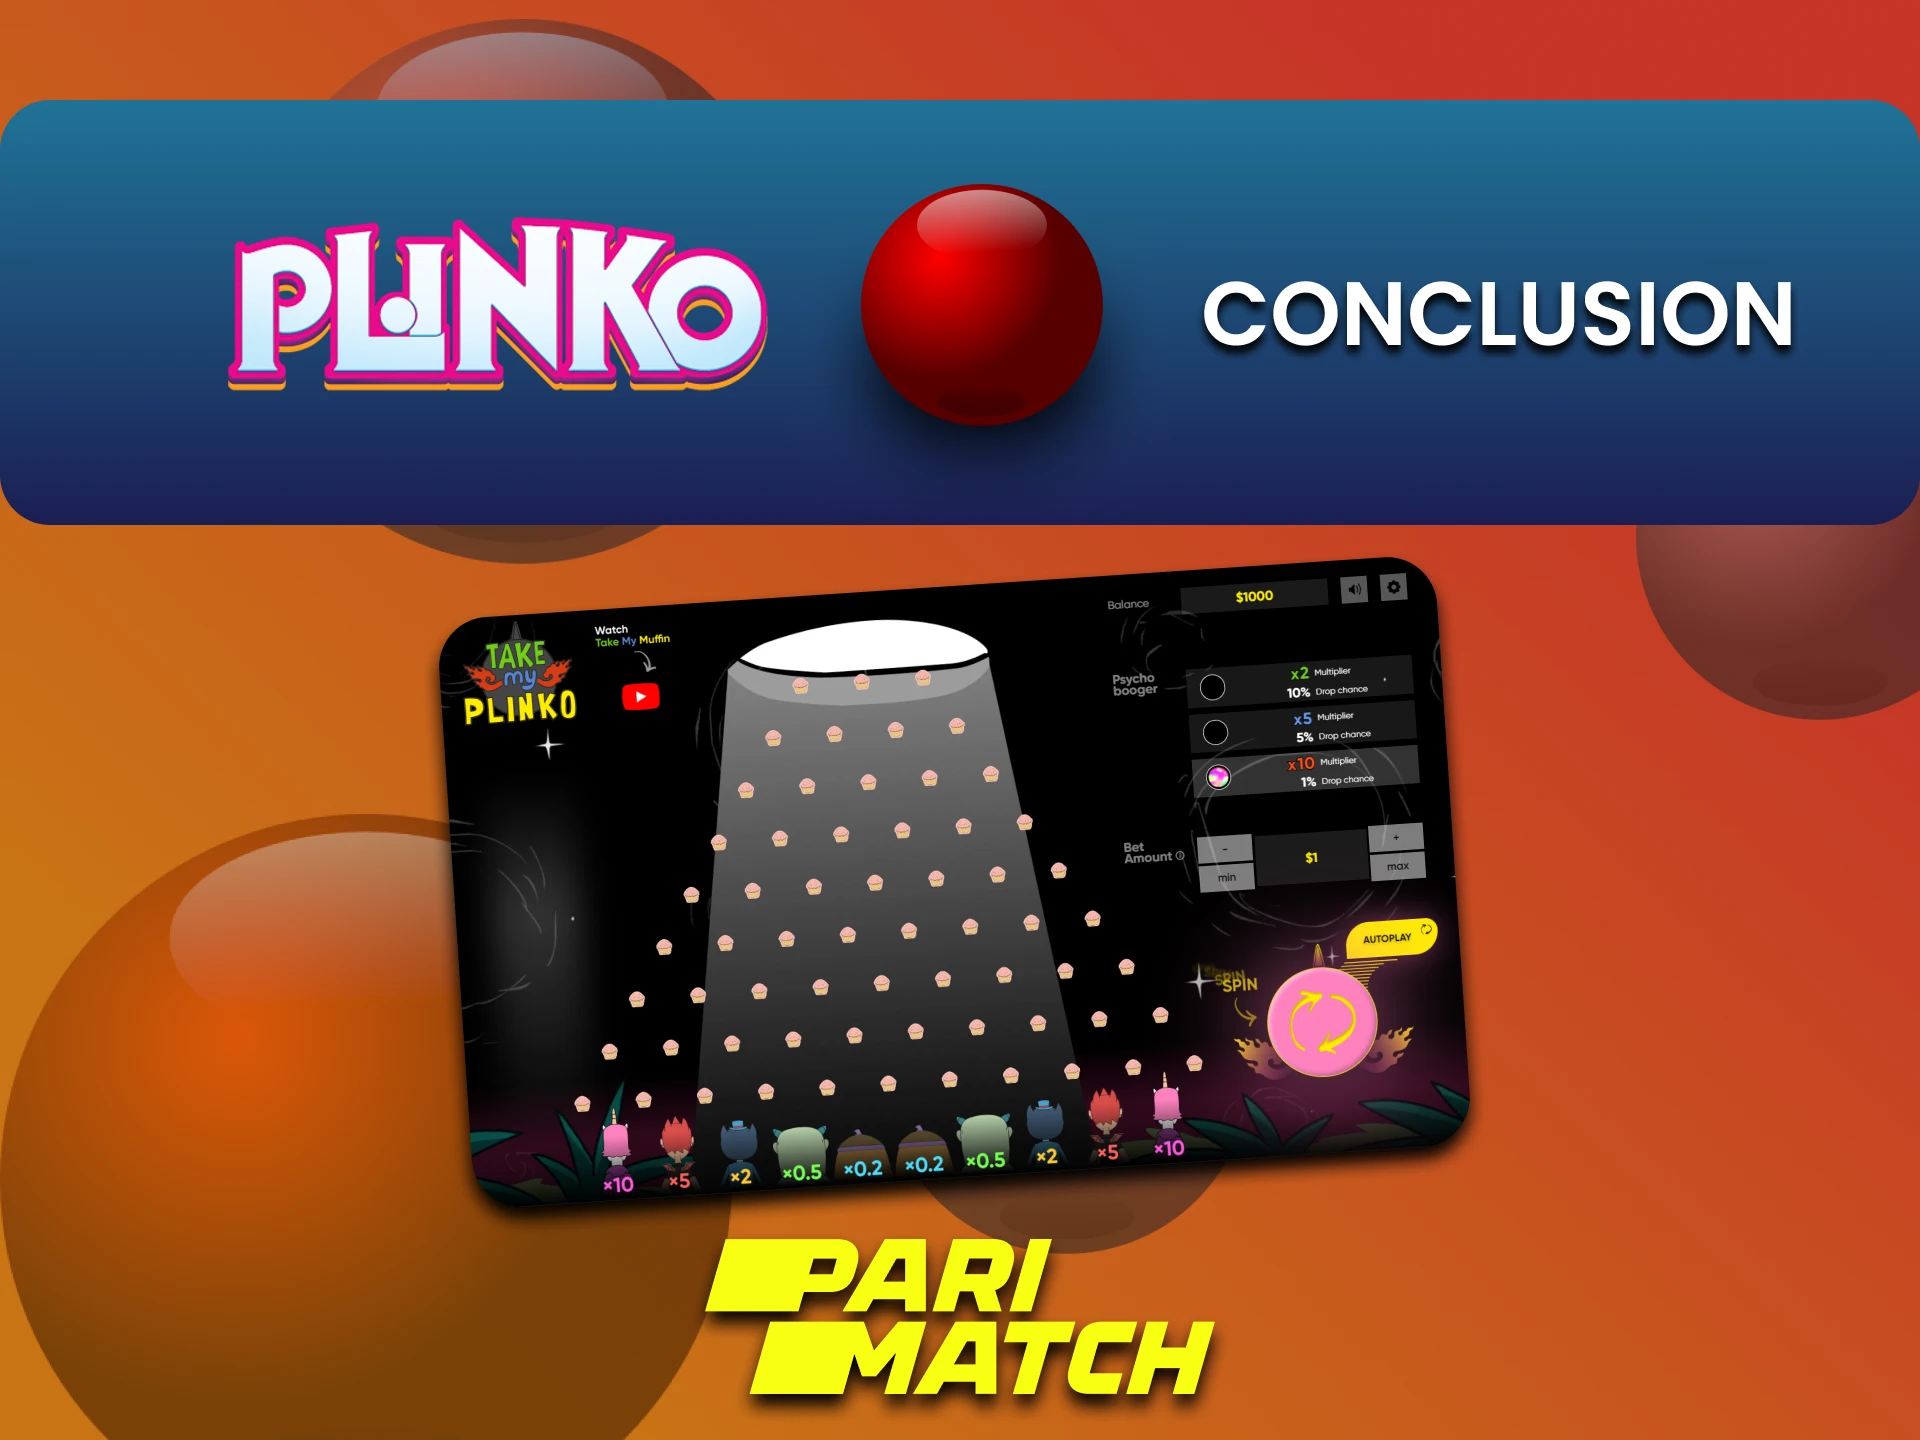 Parimatch is ideal for playing Plinko.